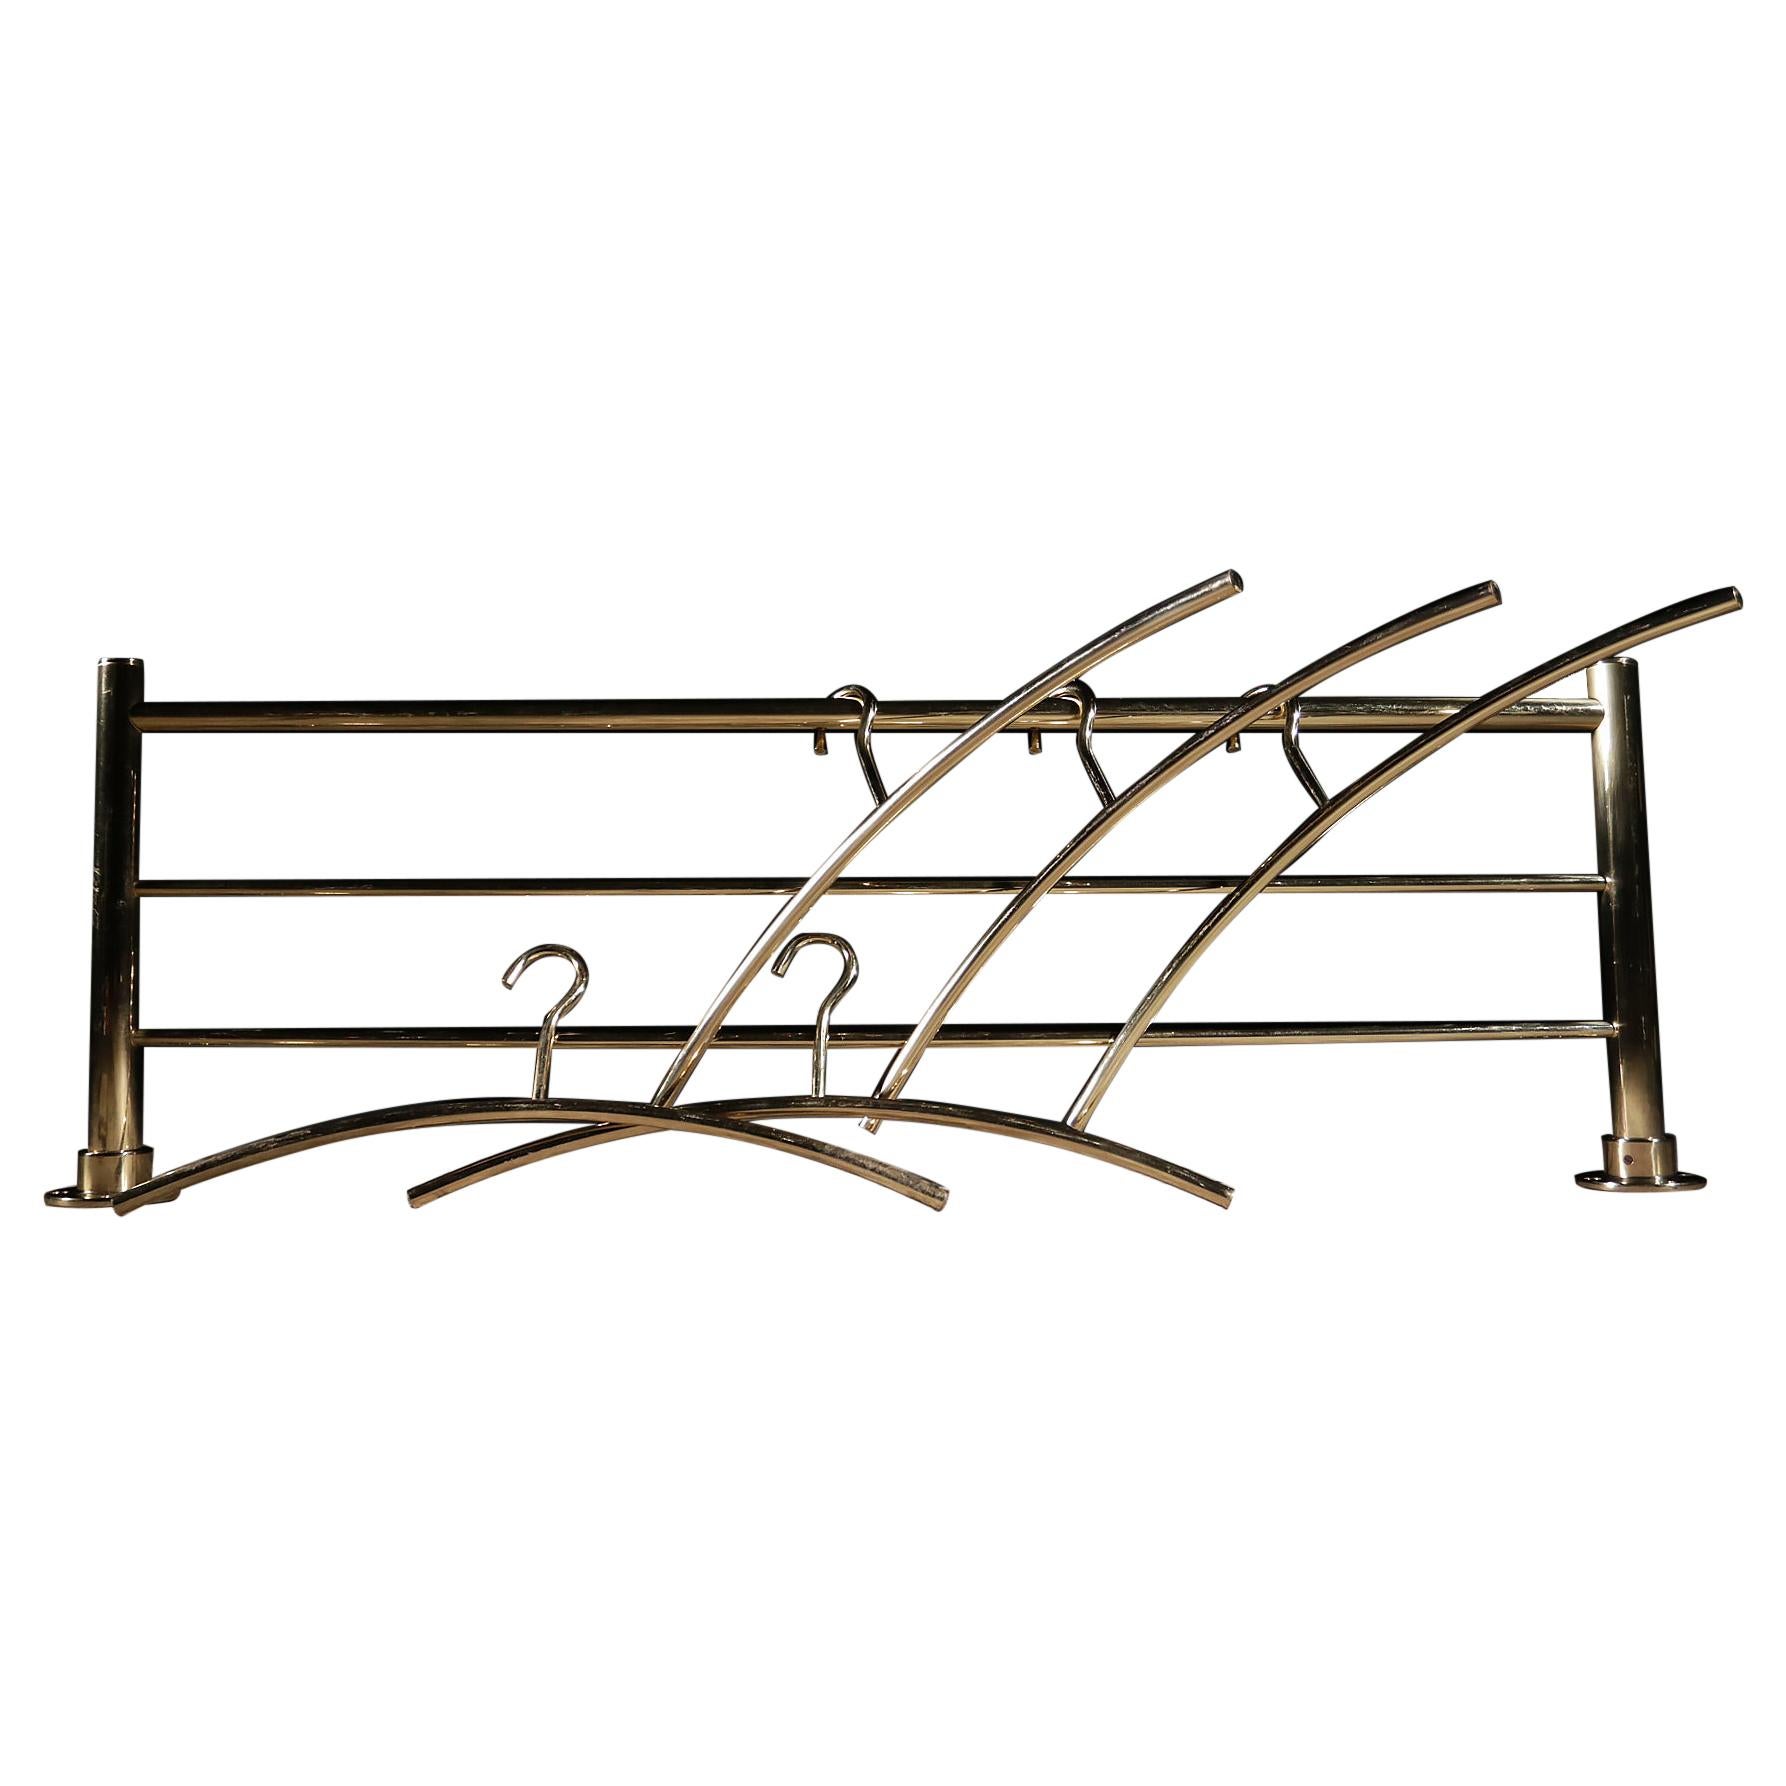 Hollywood Regency Solid Brass Coat Rack with 6 Hangers, 1980